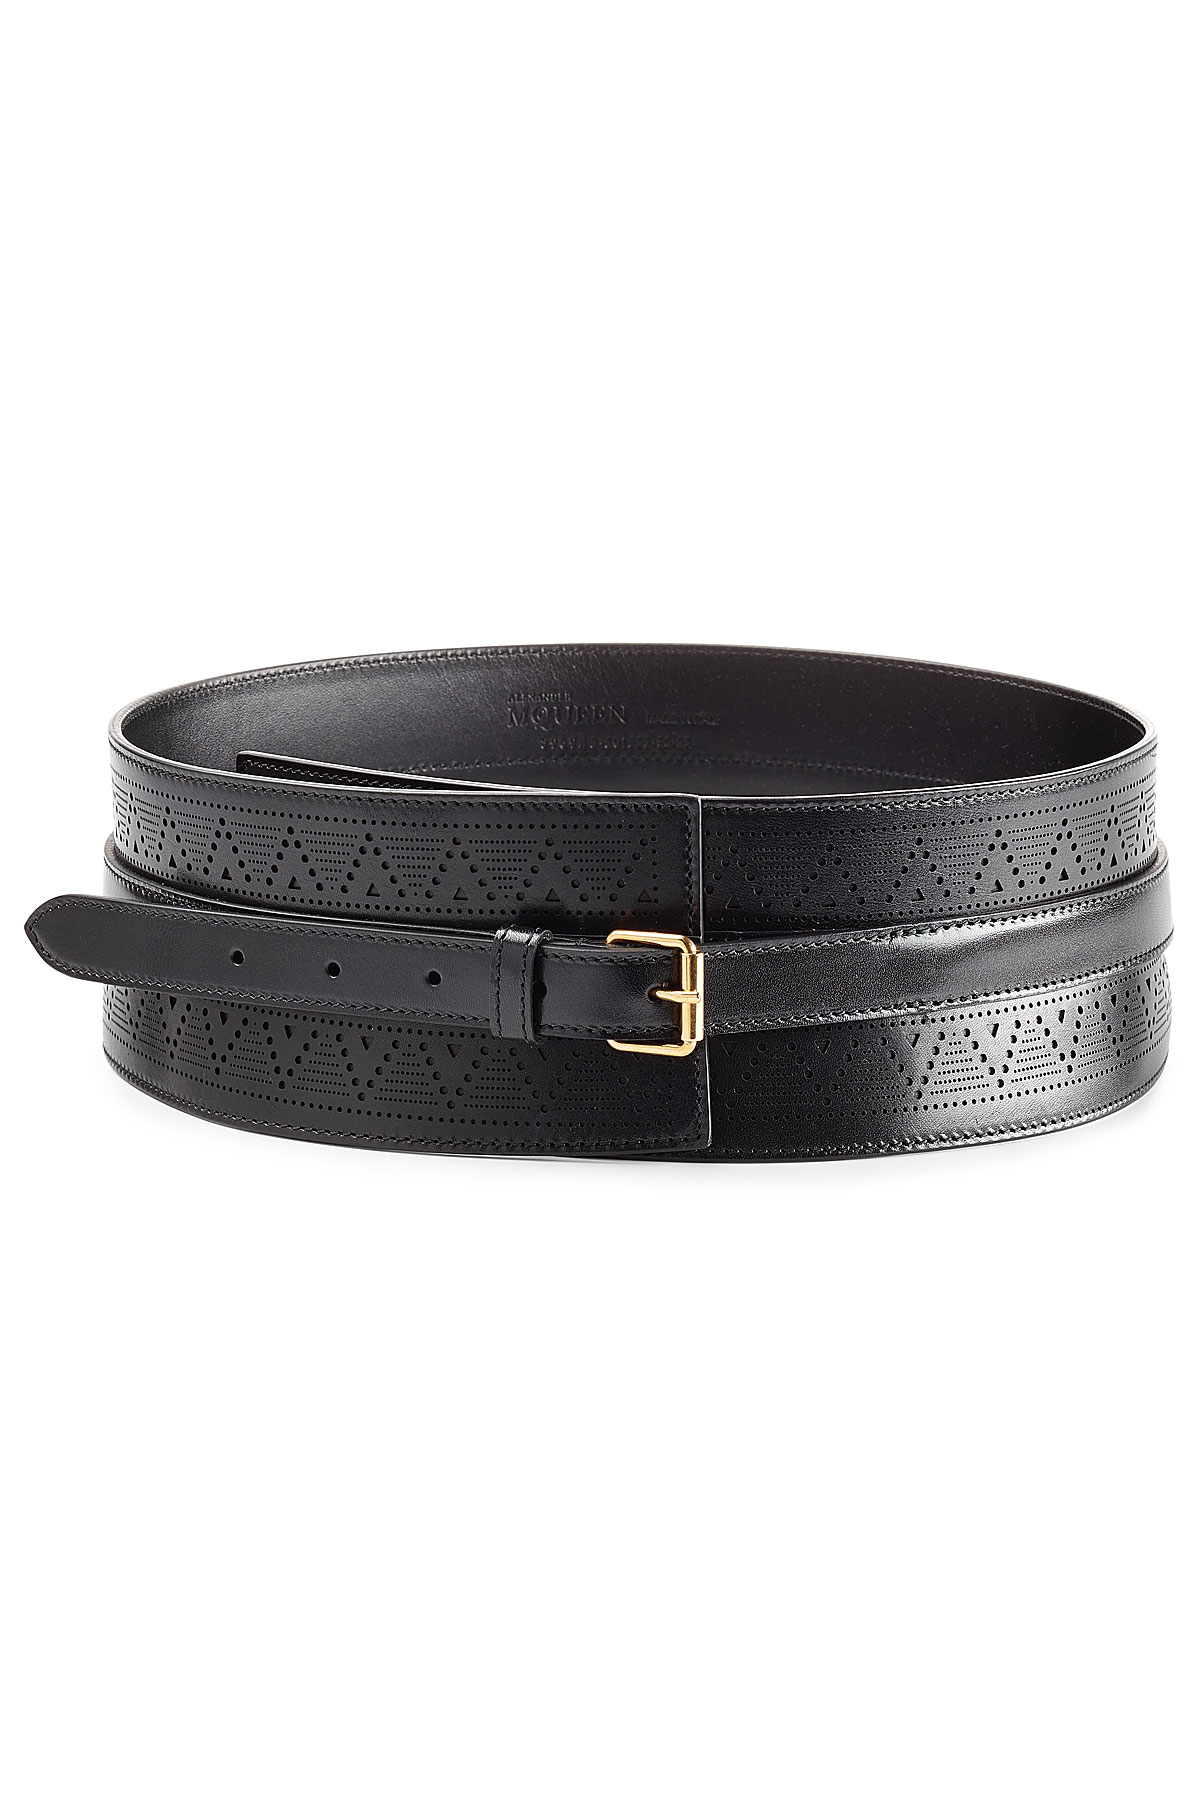 Alexander Mcqueen Leather Belt With Perforated Detail in Black | Lyst